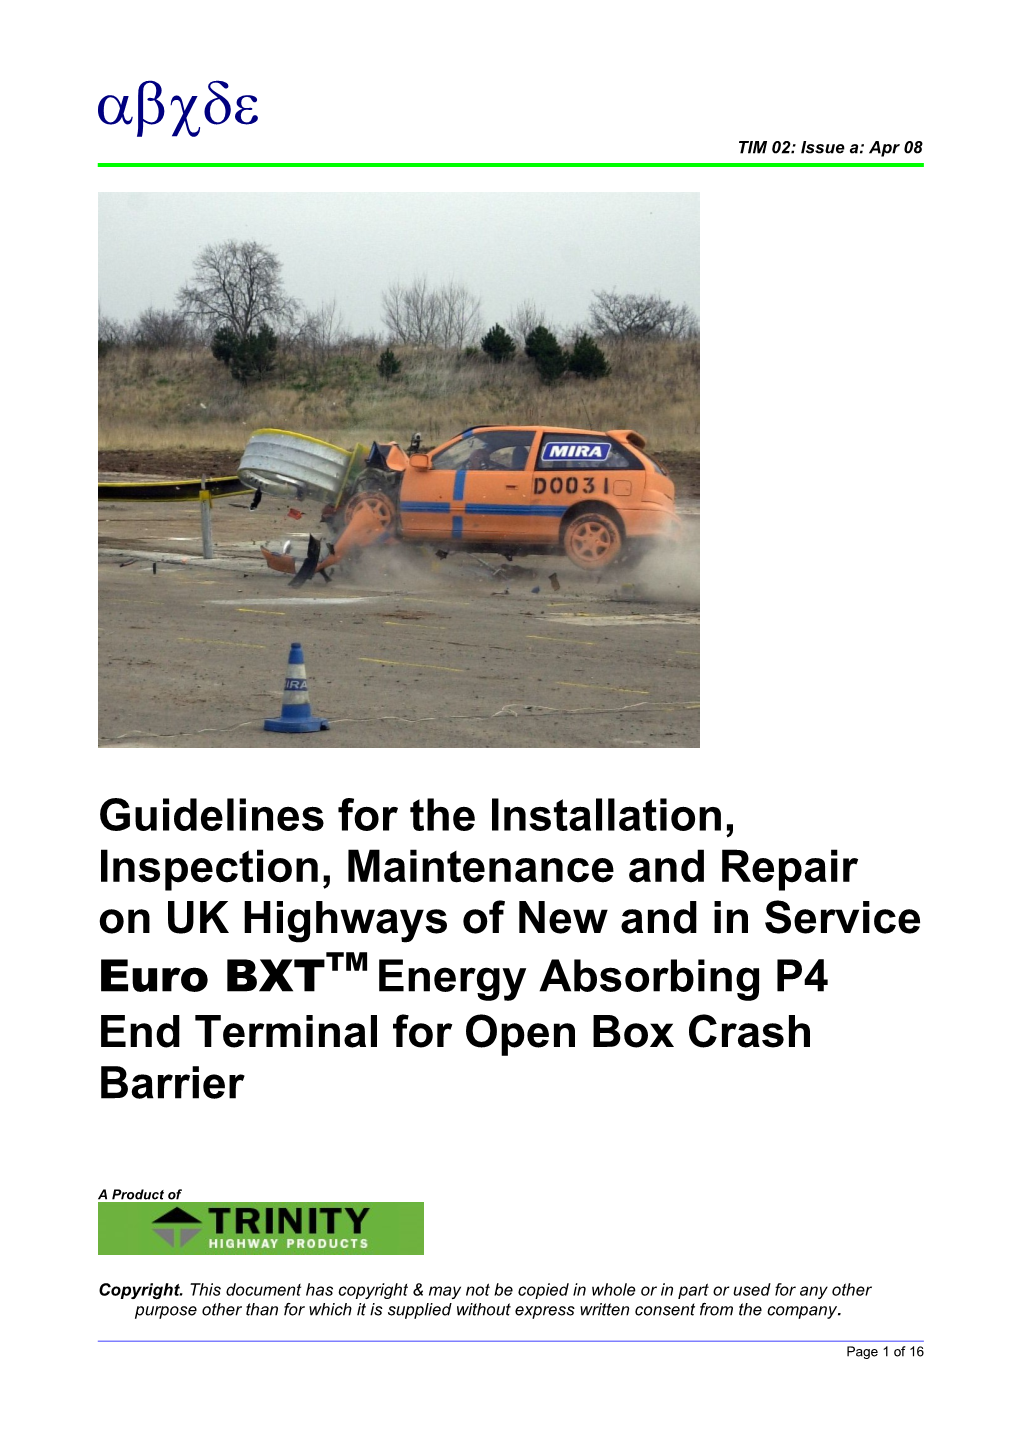 Guidelines for the Installation, Inspection, Maintenance and Repair on UK Highways Of